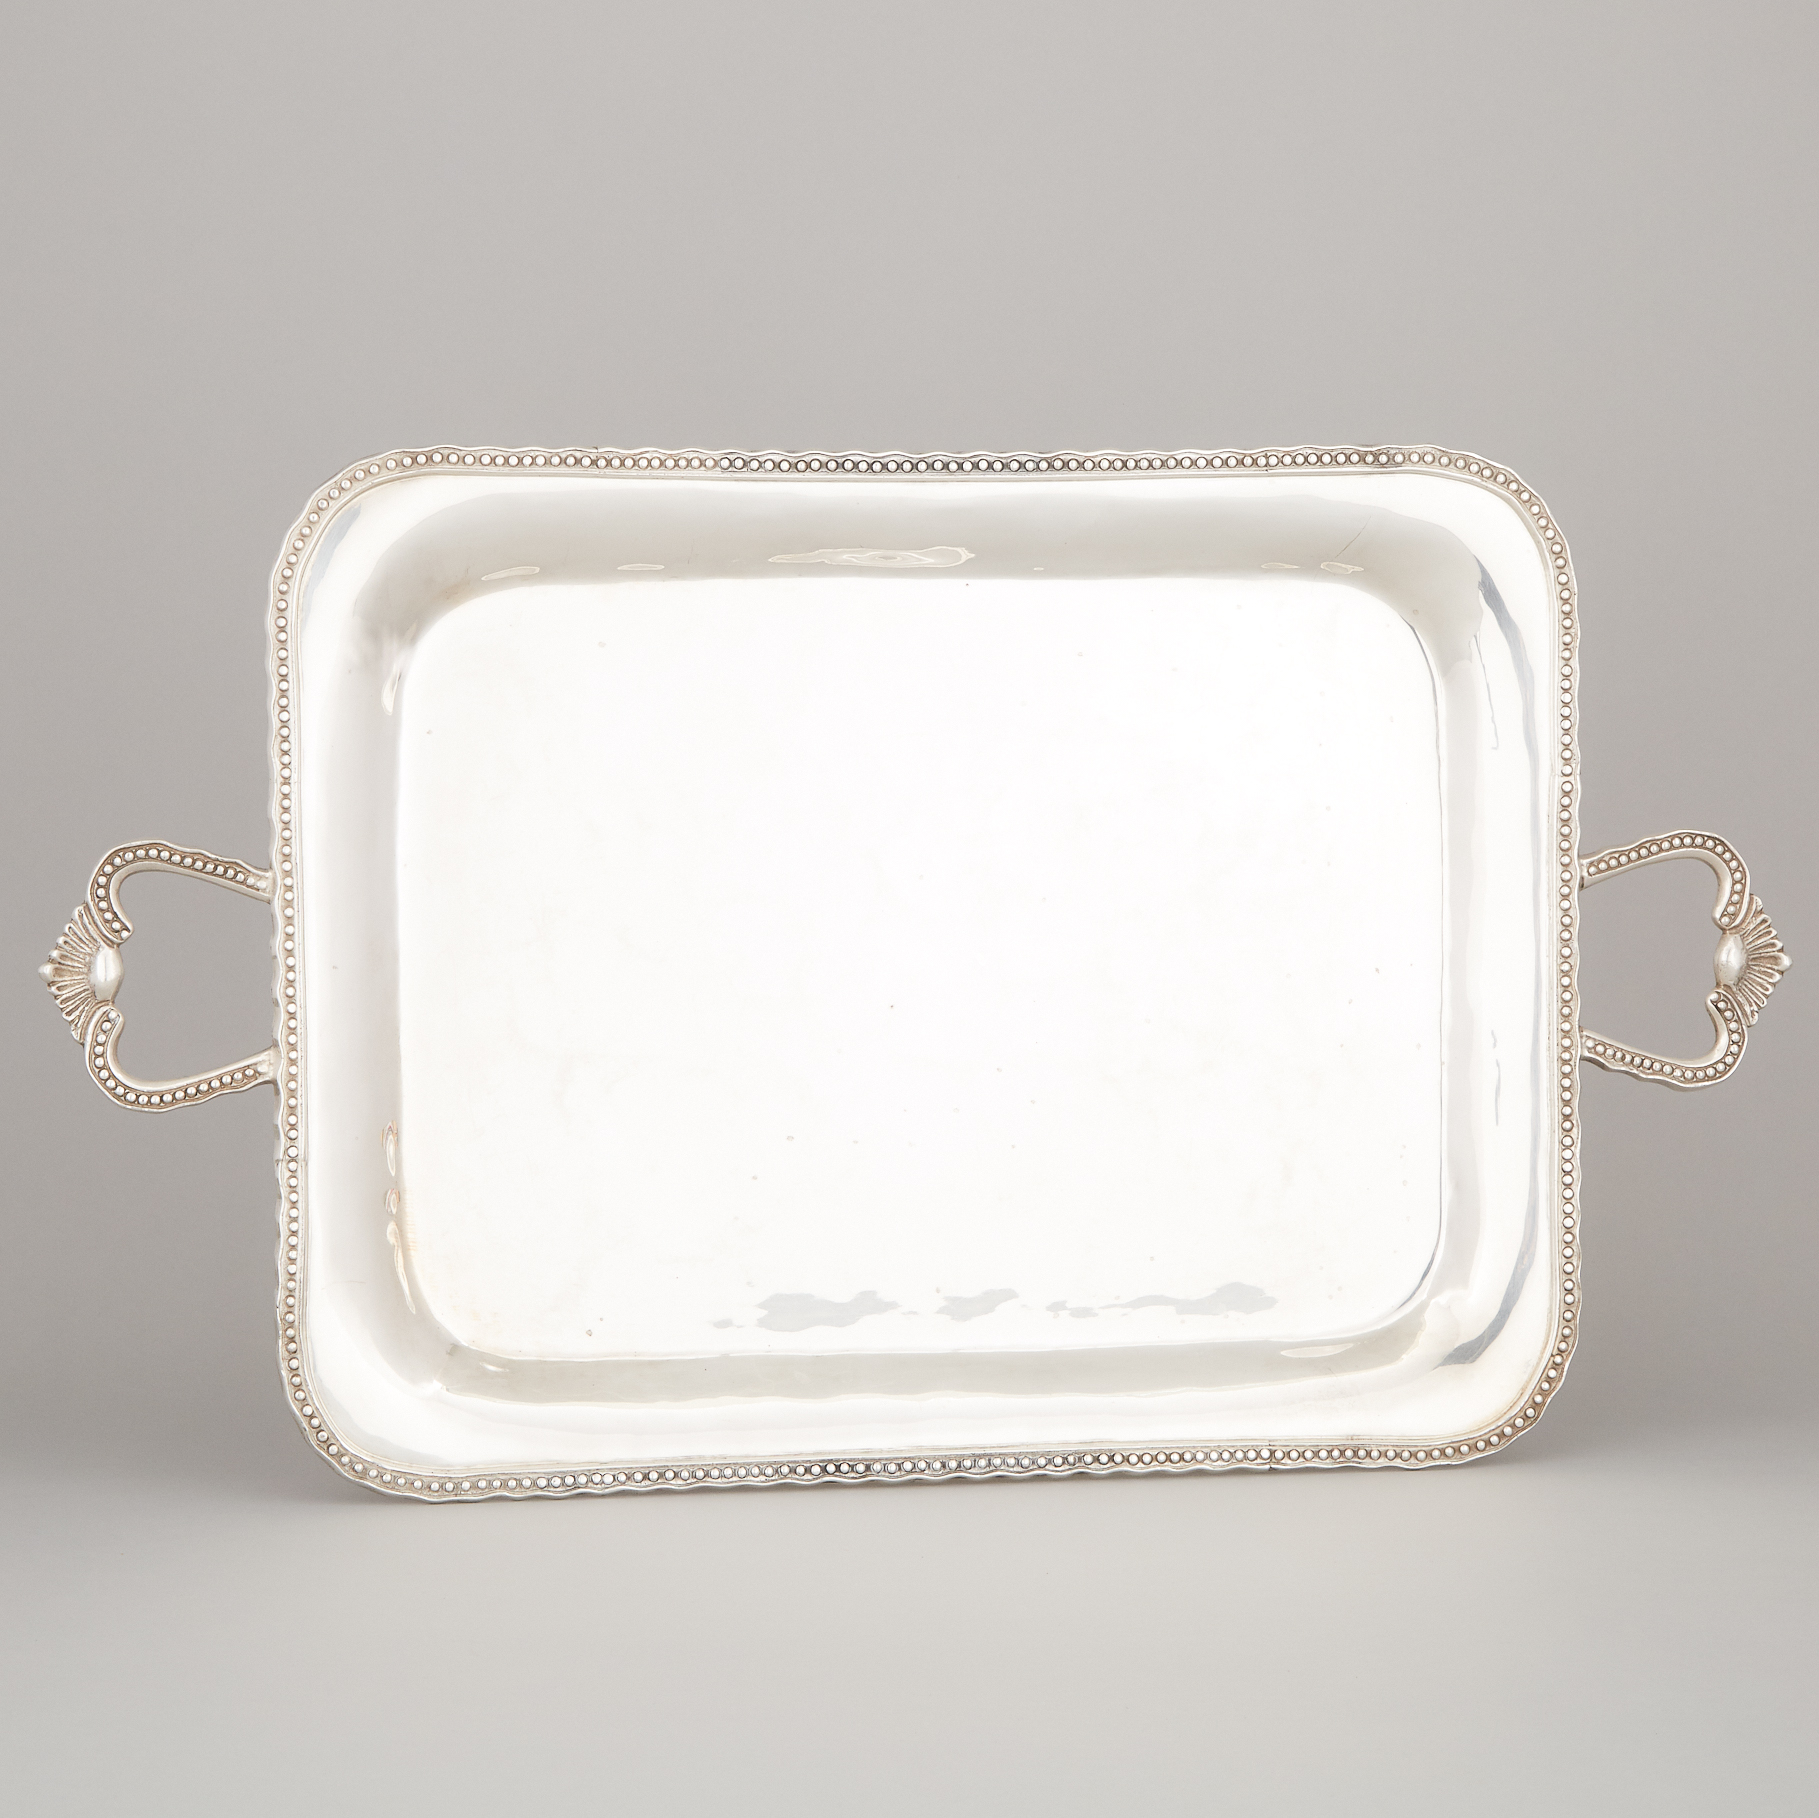 Silver Two-Handled Serving Tray, Le Trianon, possibly Mexican or South American, 20th century